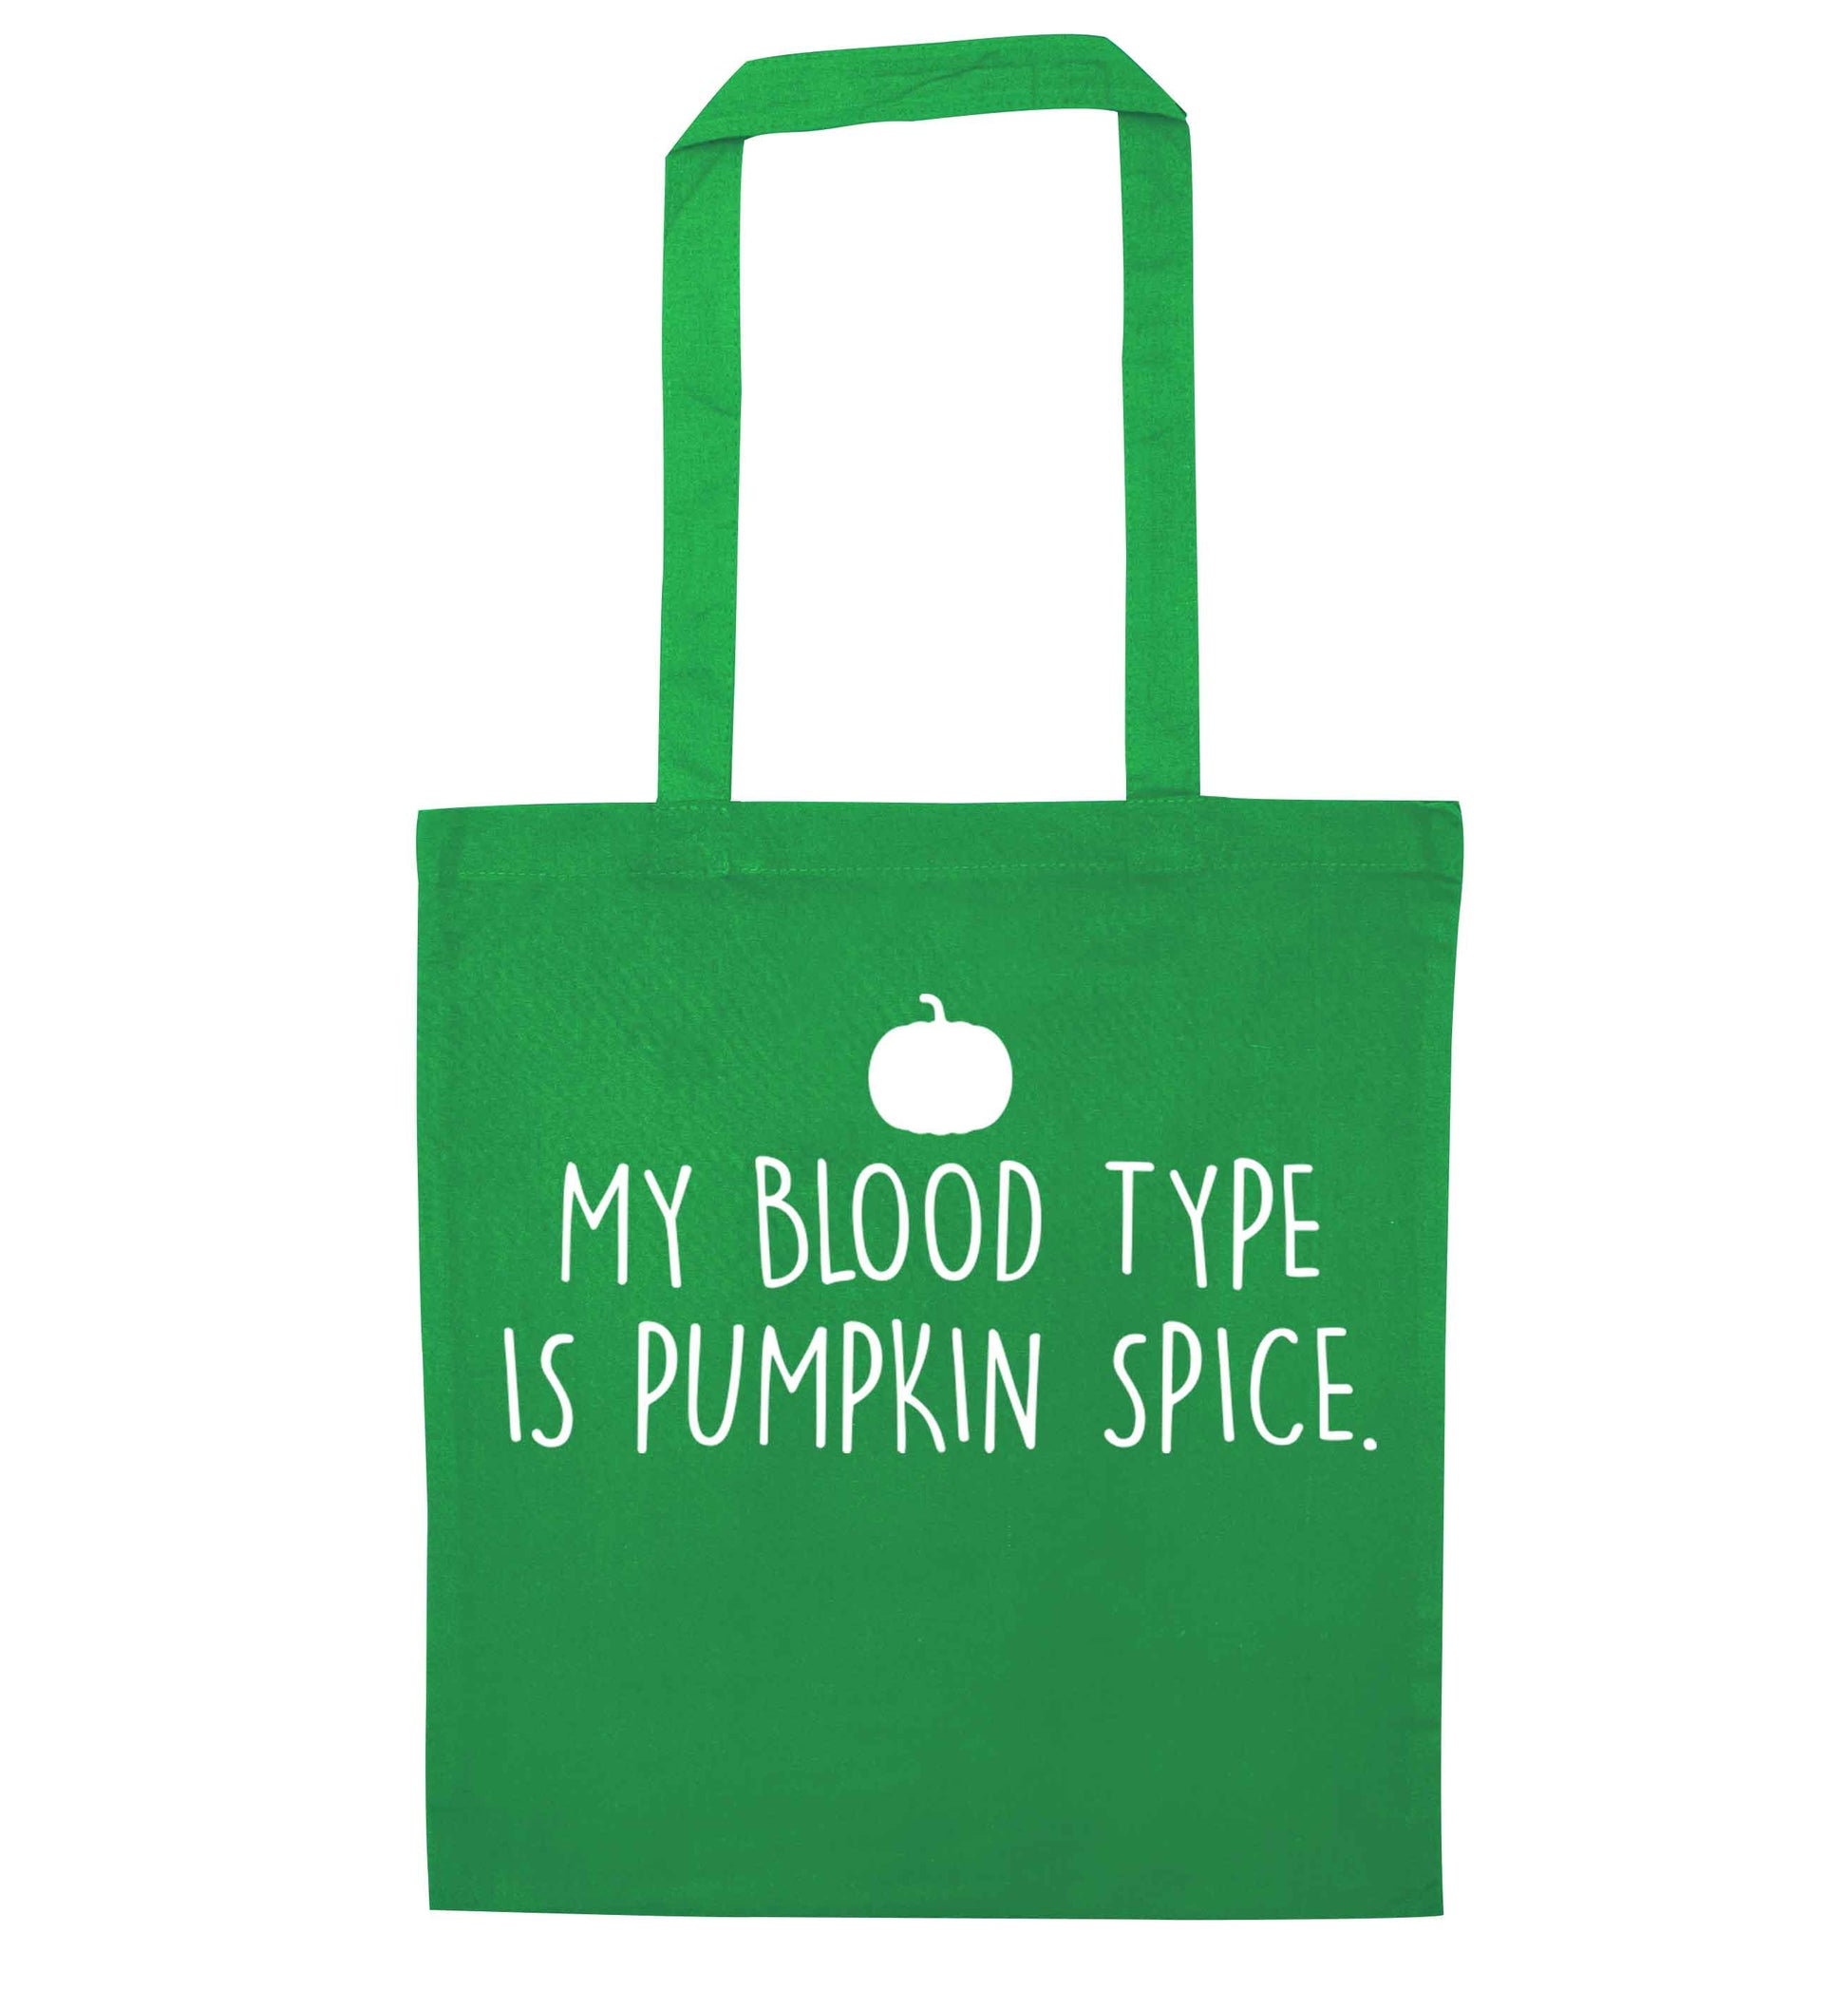 Let Be Pumpkin Spice green tote bag